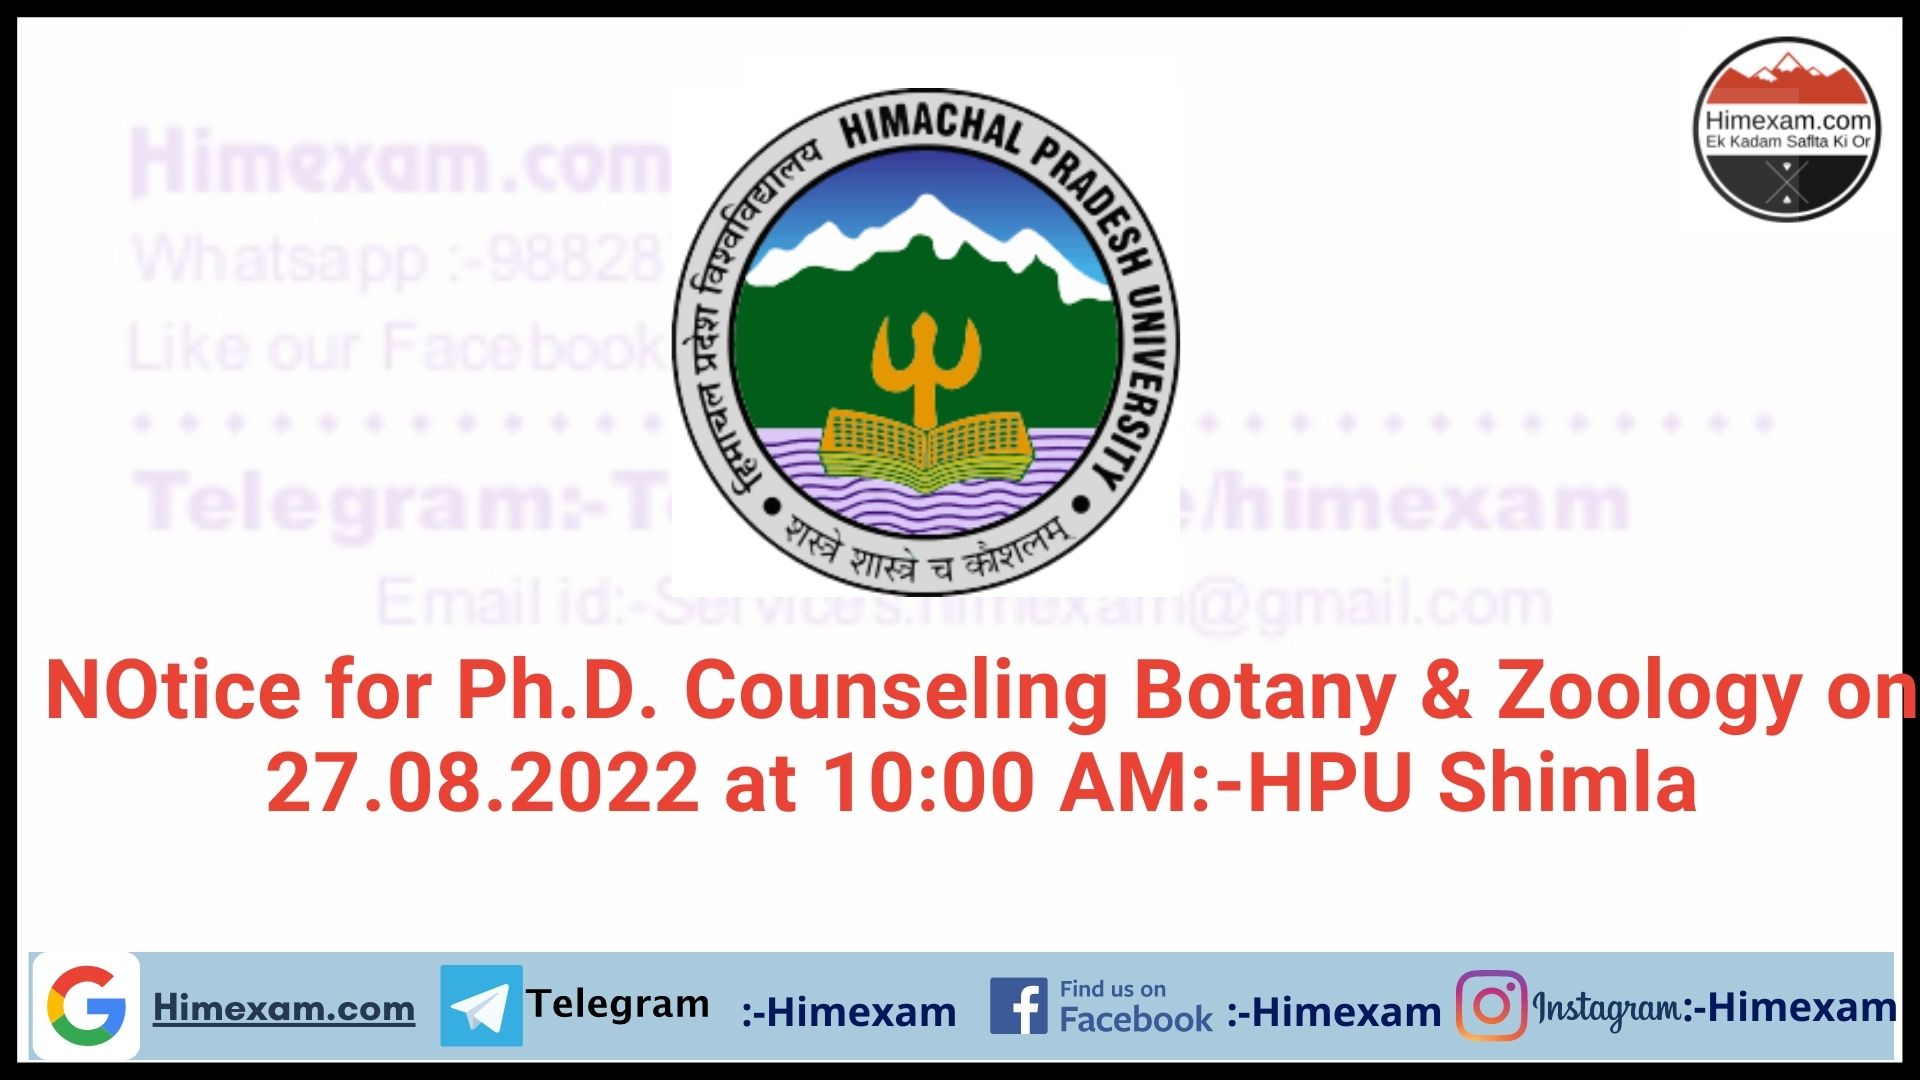 NOtice for Ph.D. Counseling Botany & Zoology on 27.08.2022 at 10:00 AM:-HPU Shimla